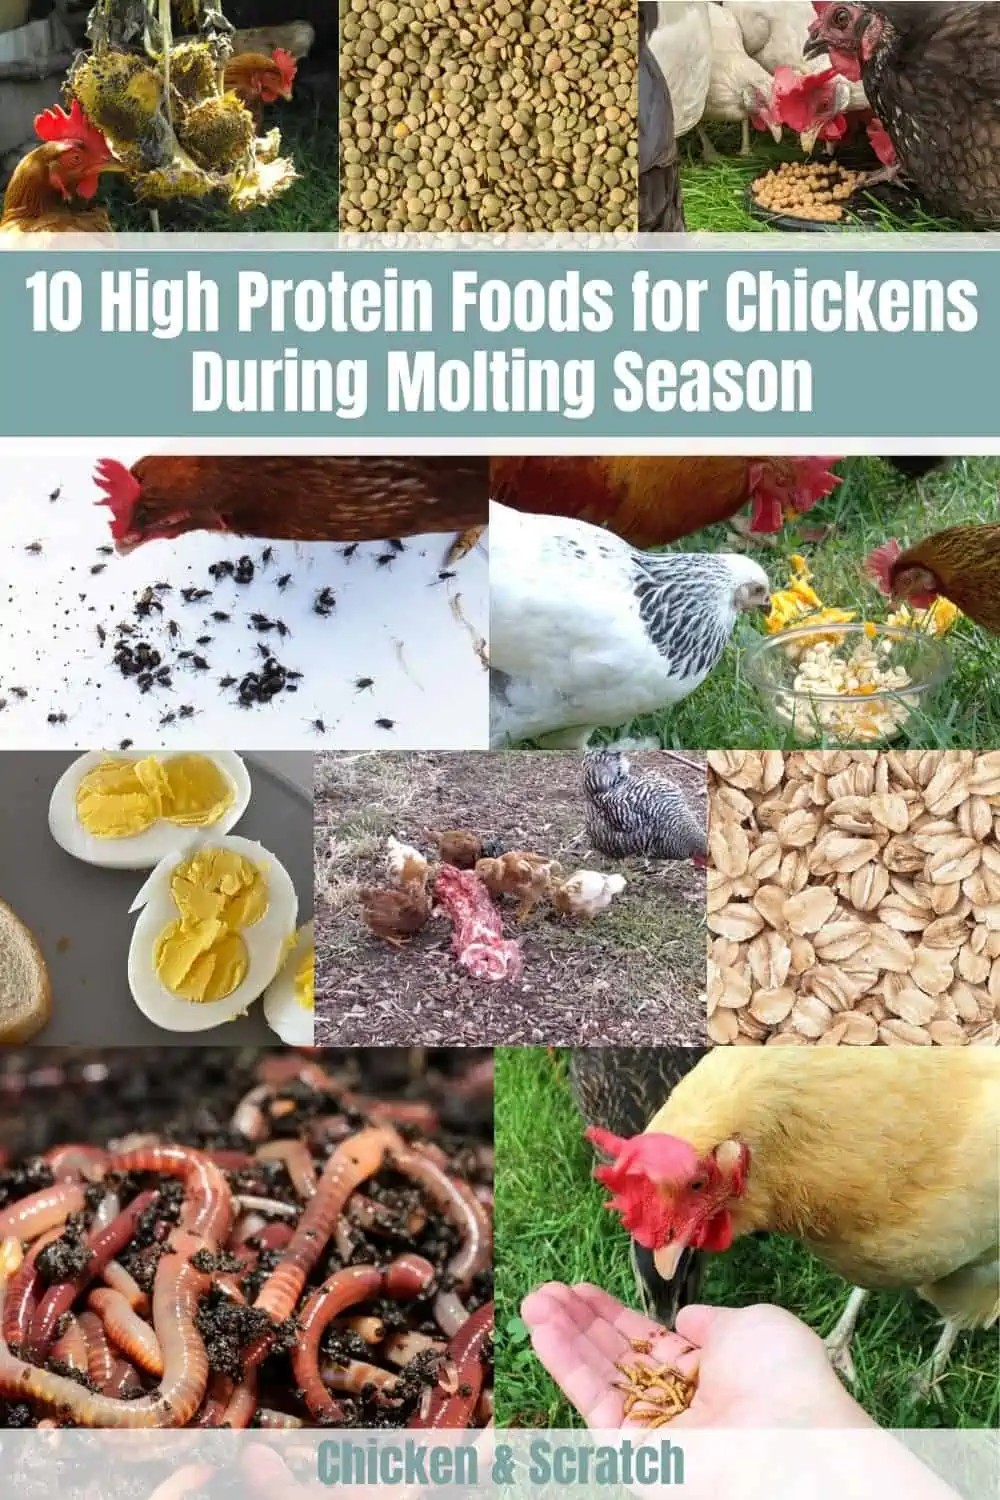 High Protein Foods for Chickens